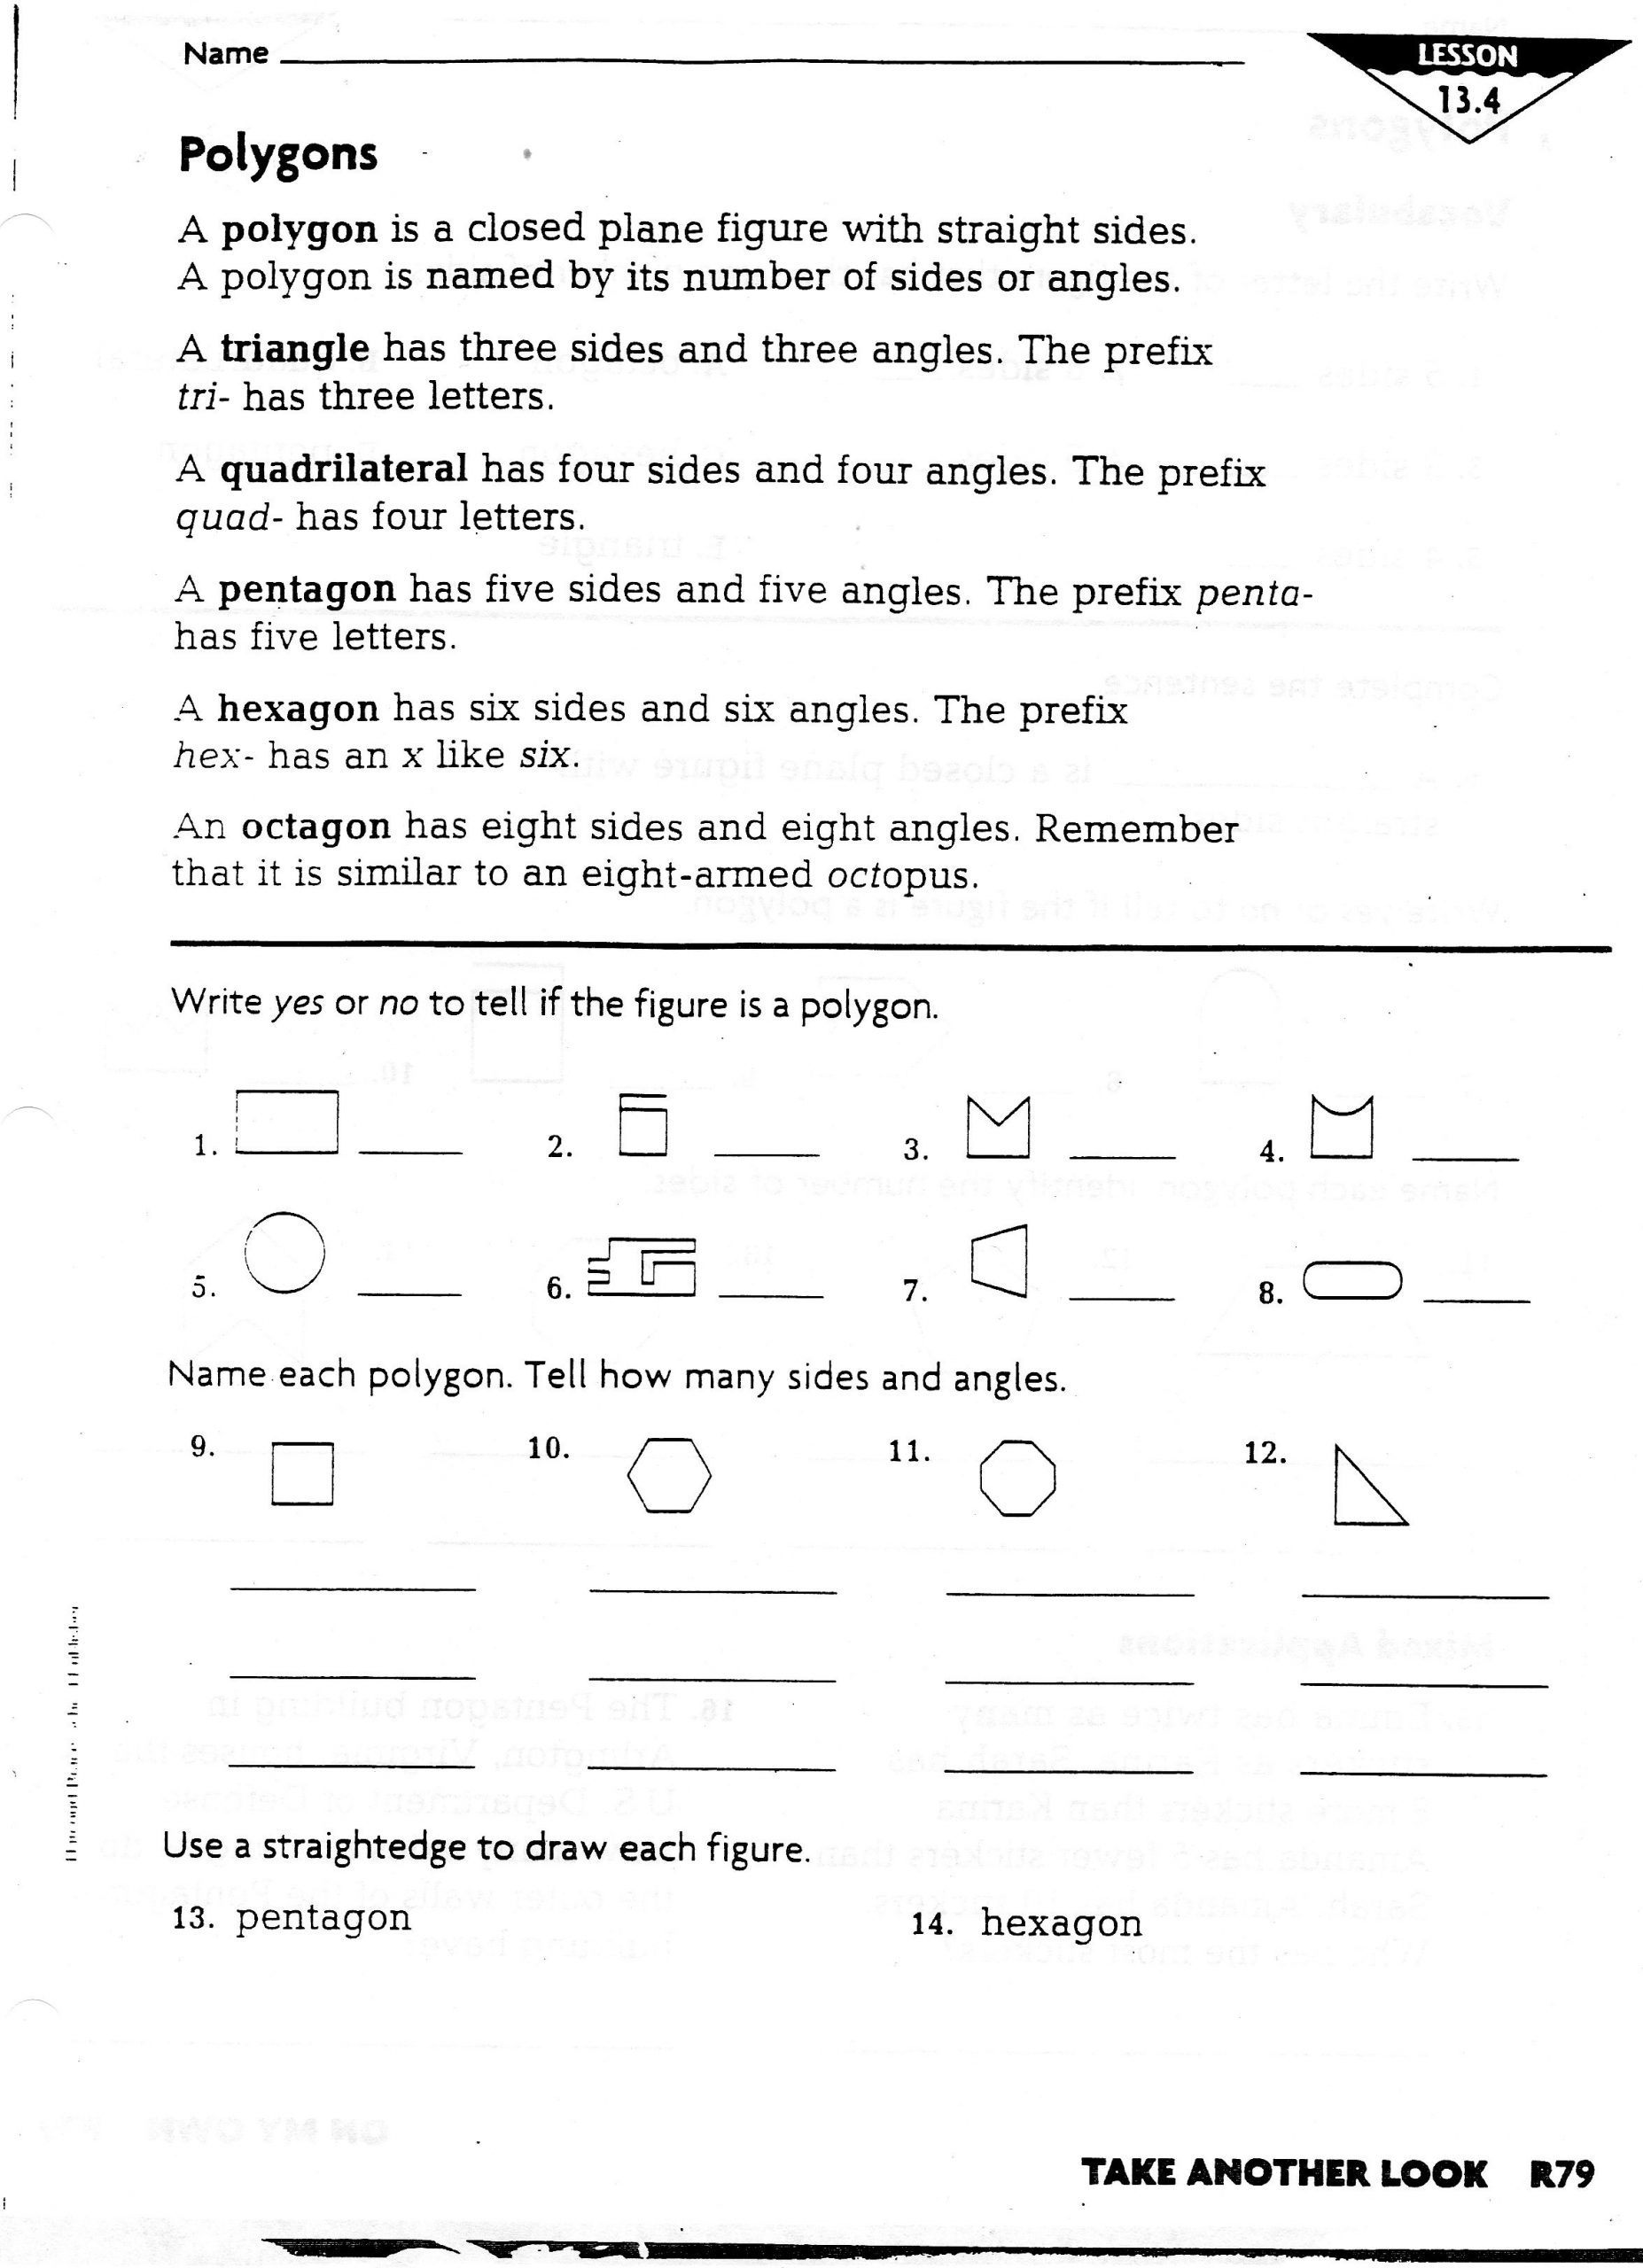 Polygon and Angles Worksheet Geometry Exterior and Interior Angles Polygon Worksheet